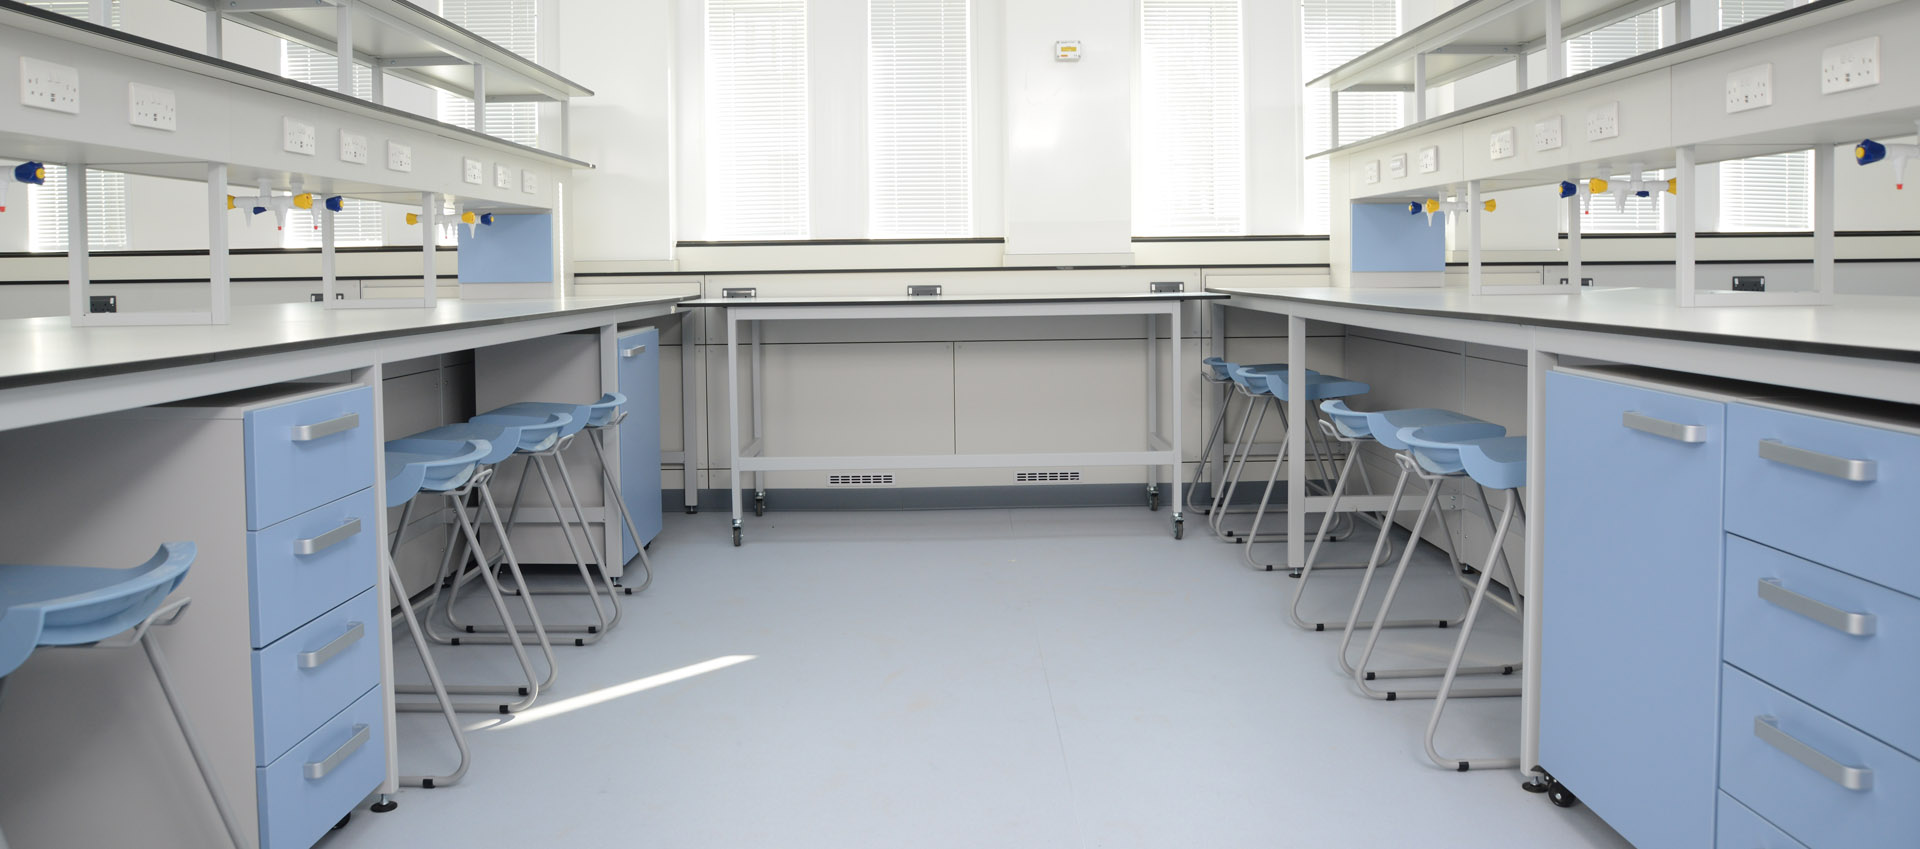 kent-university-laboratory-furniture-with-mobile-storage-units-and-blue-stools-by-klick-laboratories